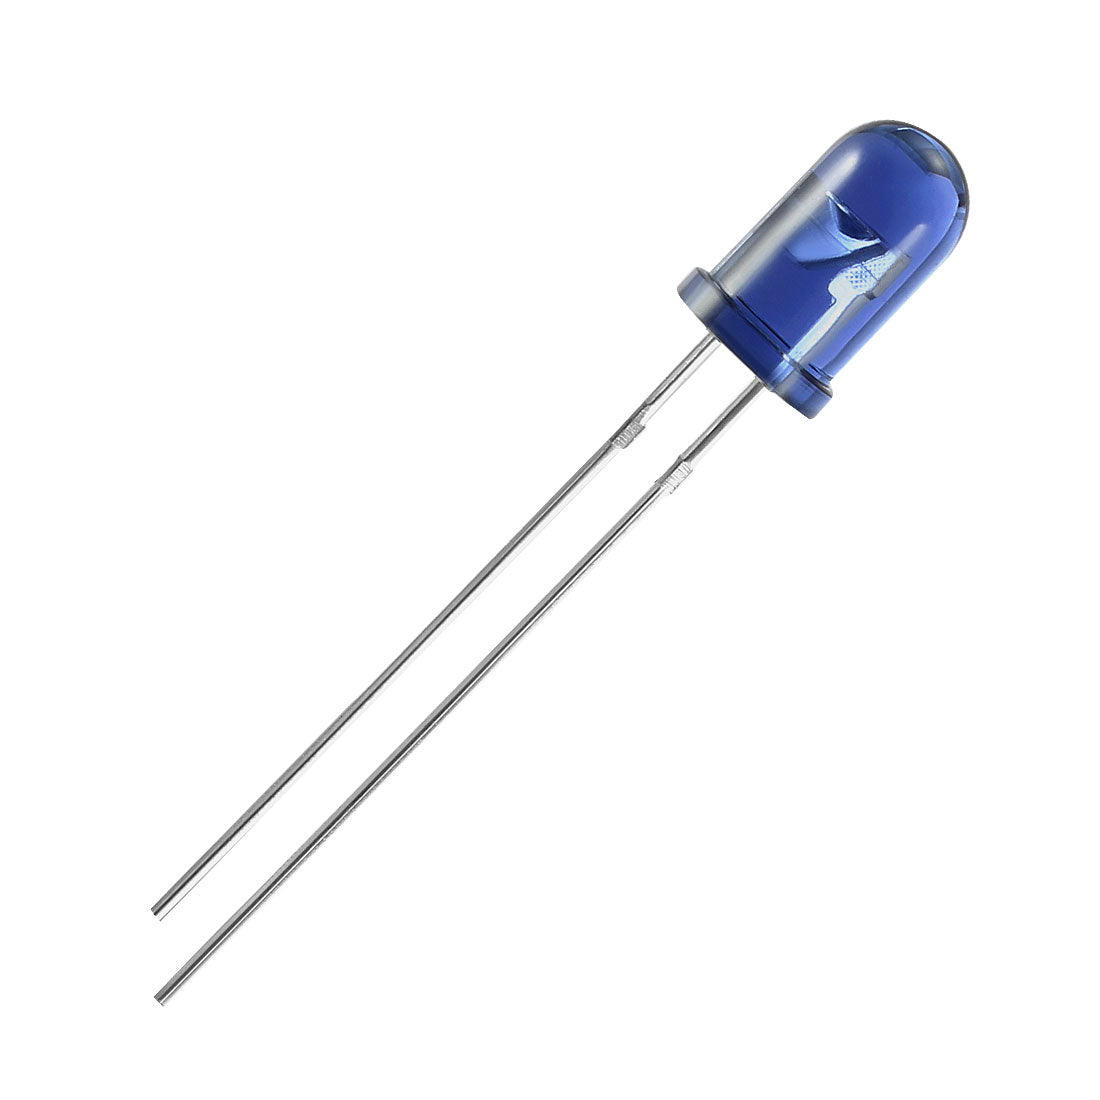 uxcell Uxcell 30pcs 5mm 940nm Infrared Emitter Diode DC 1.35V LED IR Emitter Blue Round Head